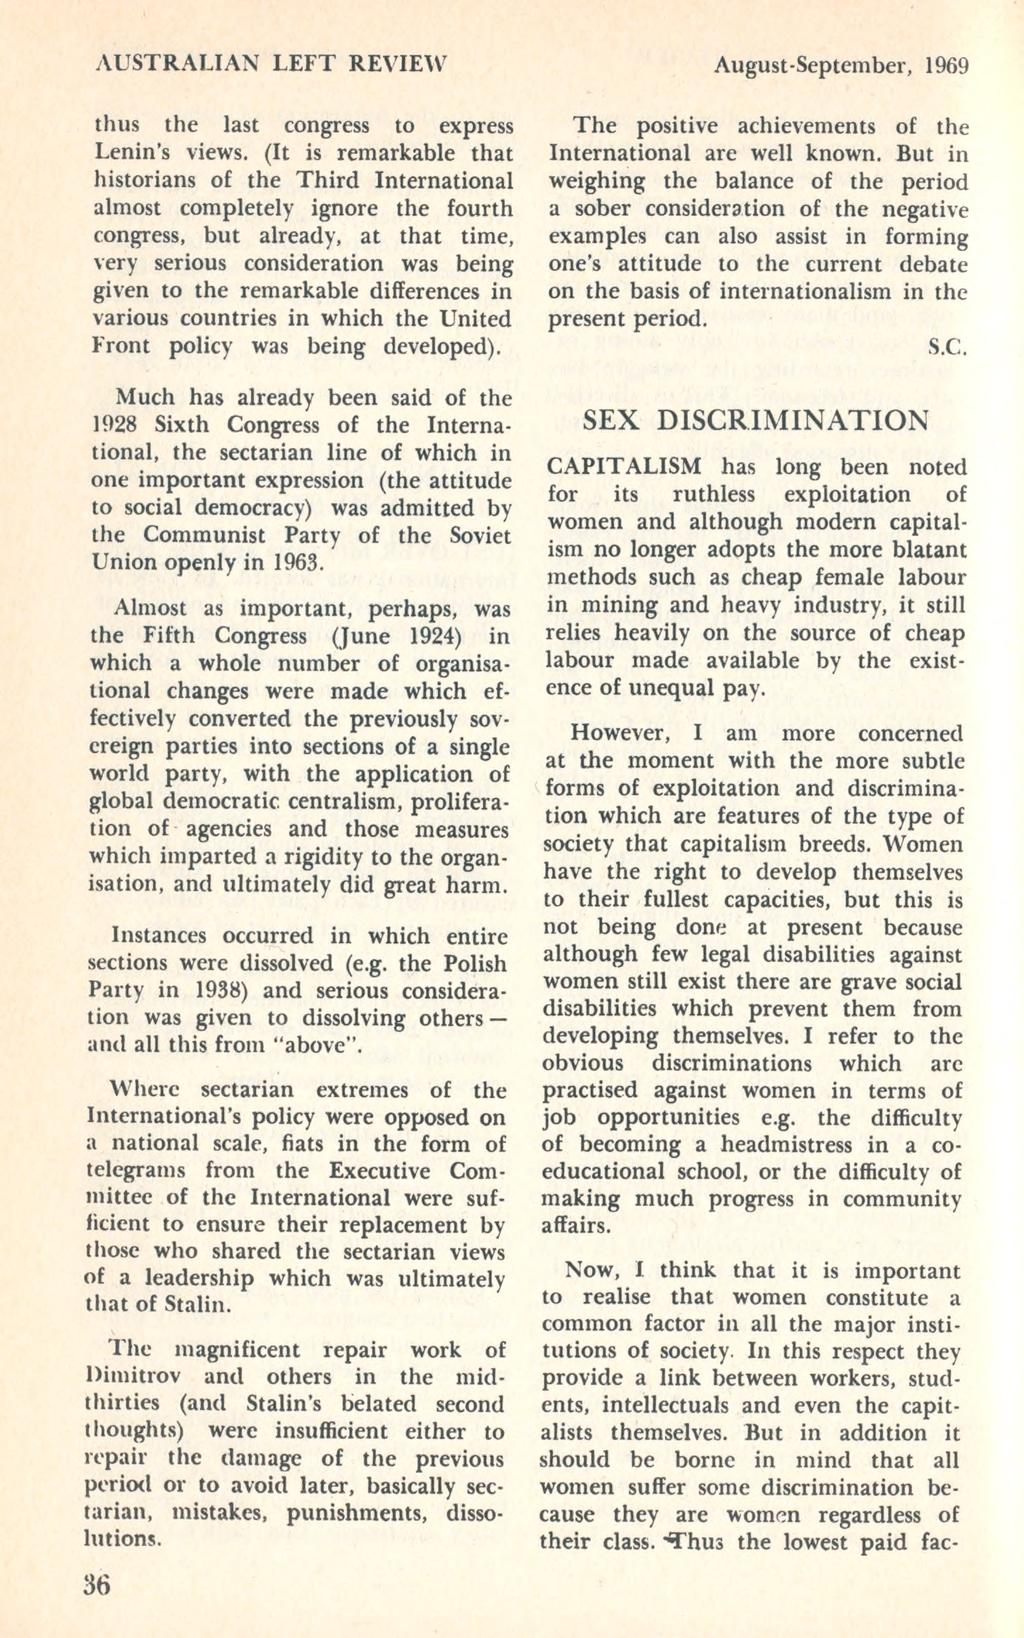 AU STRALIAN LEFT REVIEW August-September, 1969 thus the last congress to express Lenin's views.